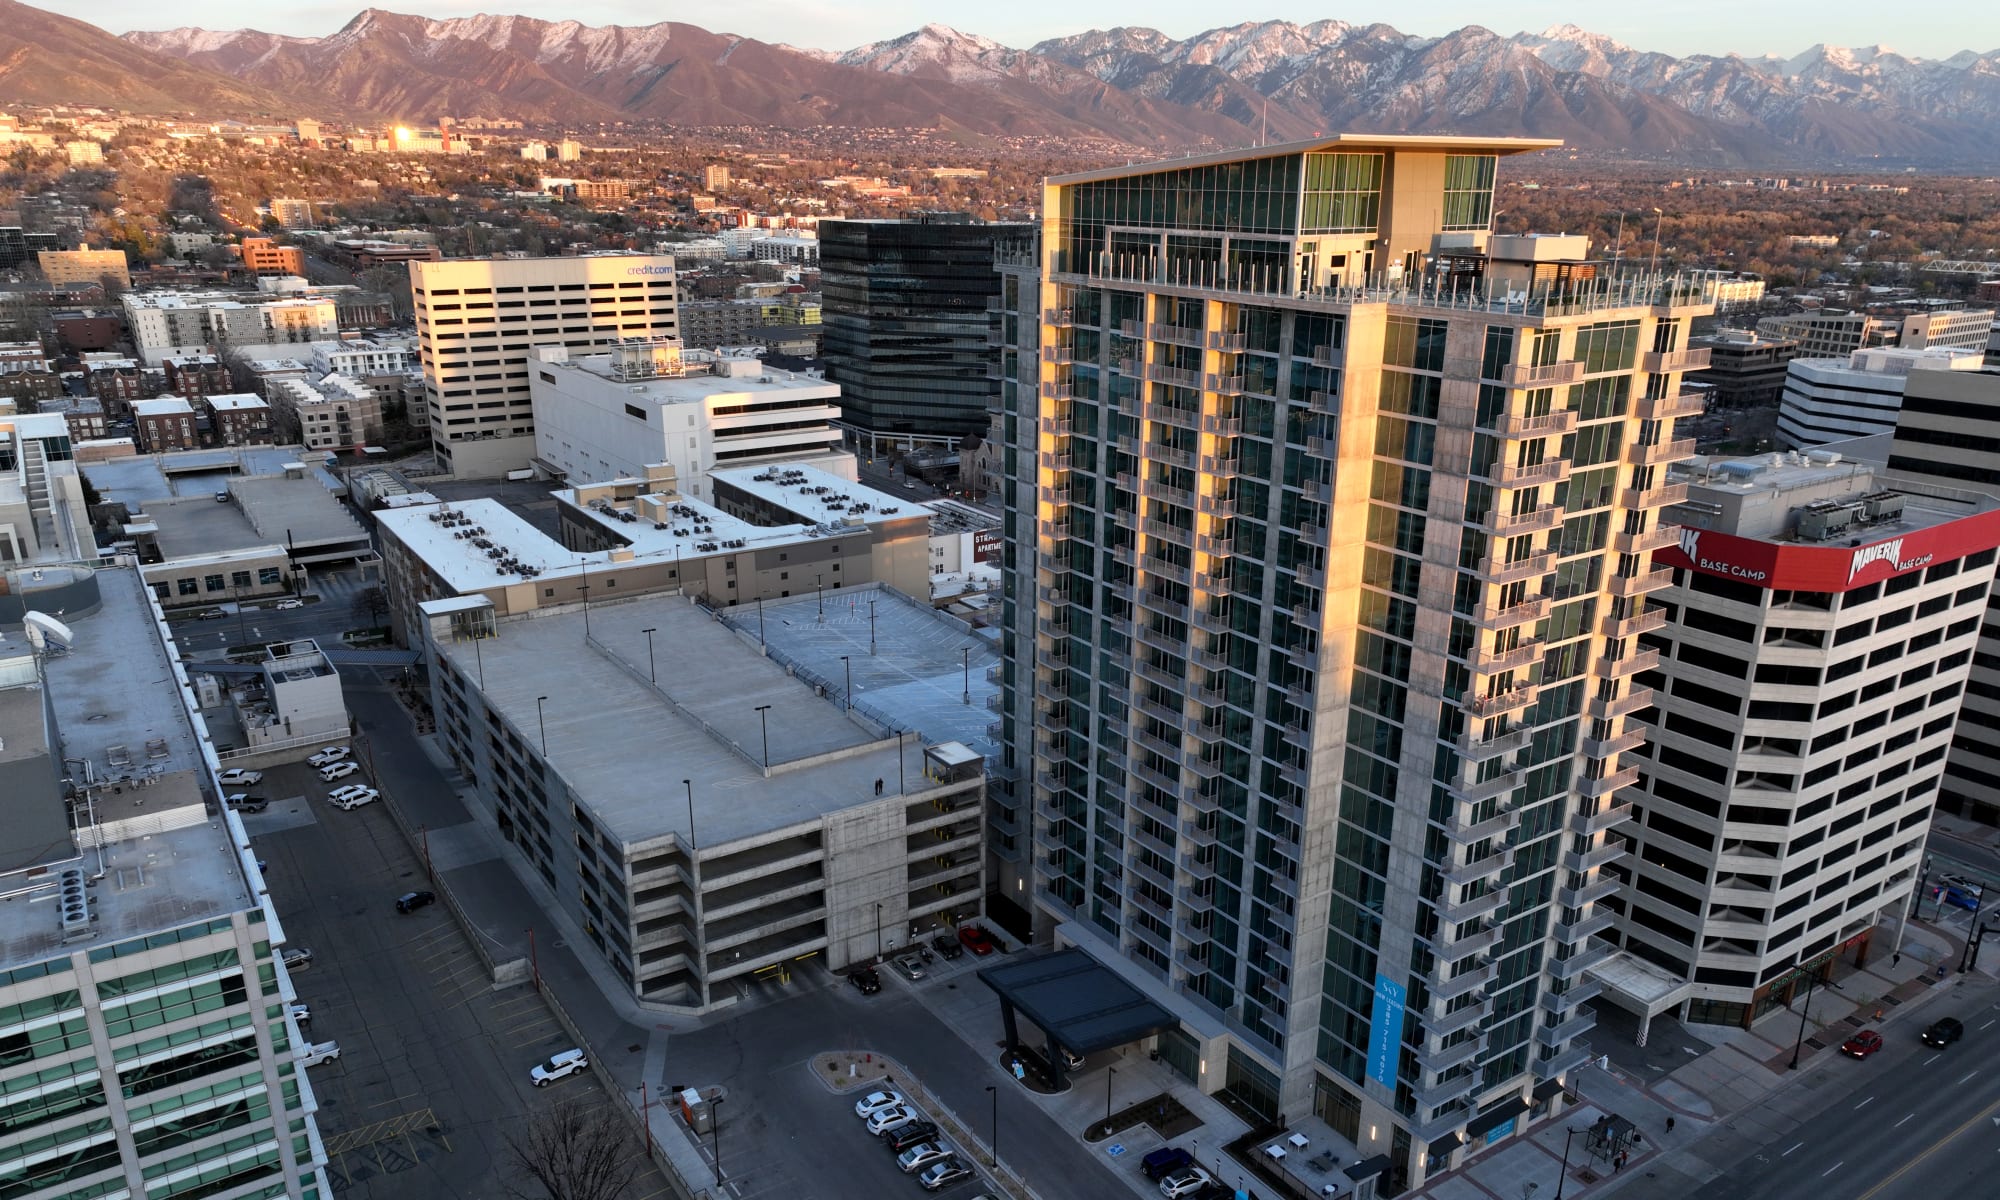 Drone view from the northwest side showing the Wasatch Mountains at Luxury high-rise community of Liberty SKY in Salt Lake City, Utah